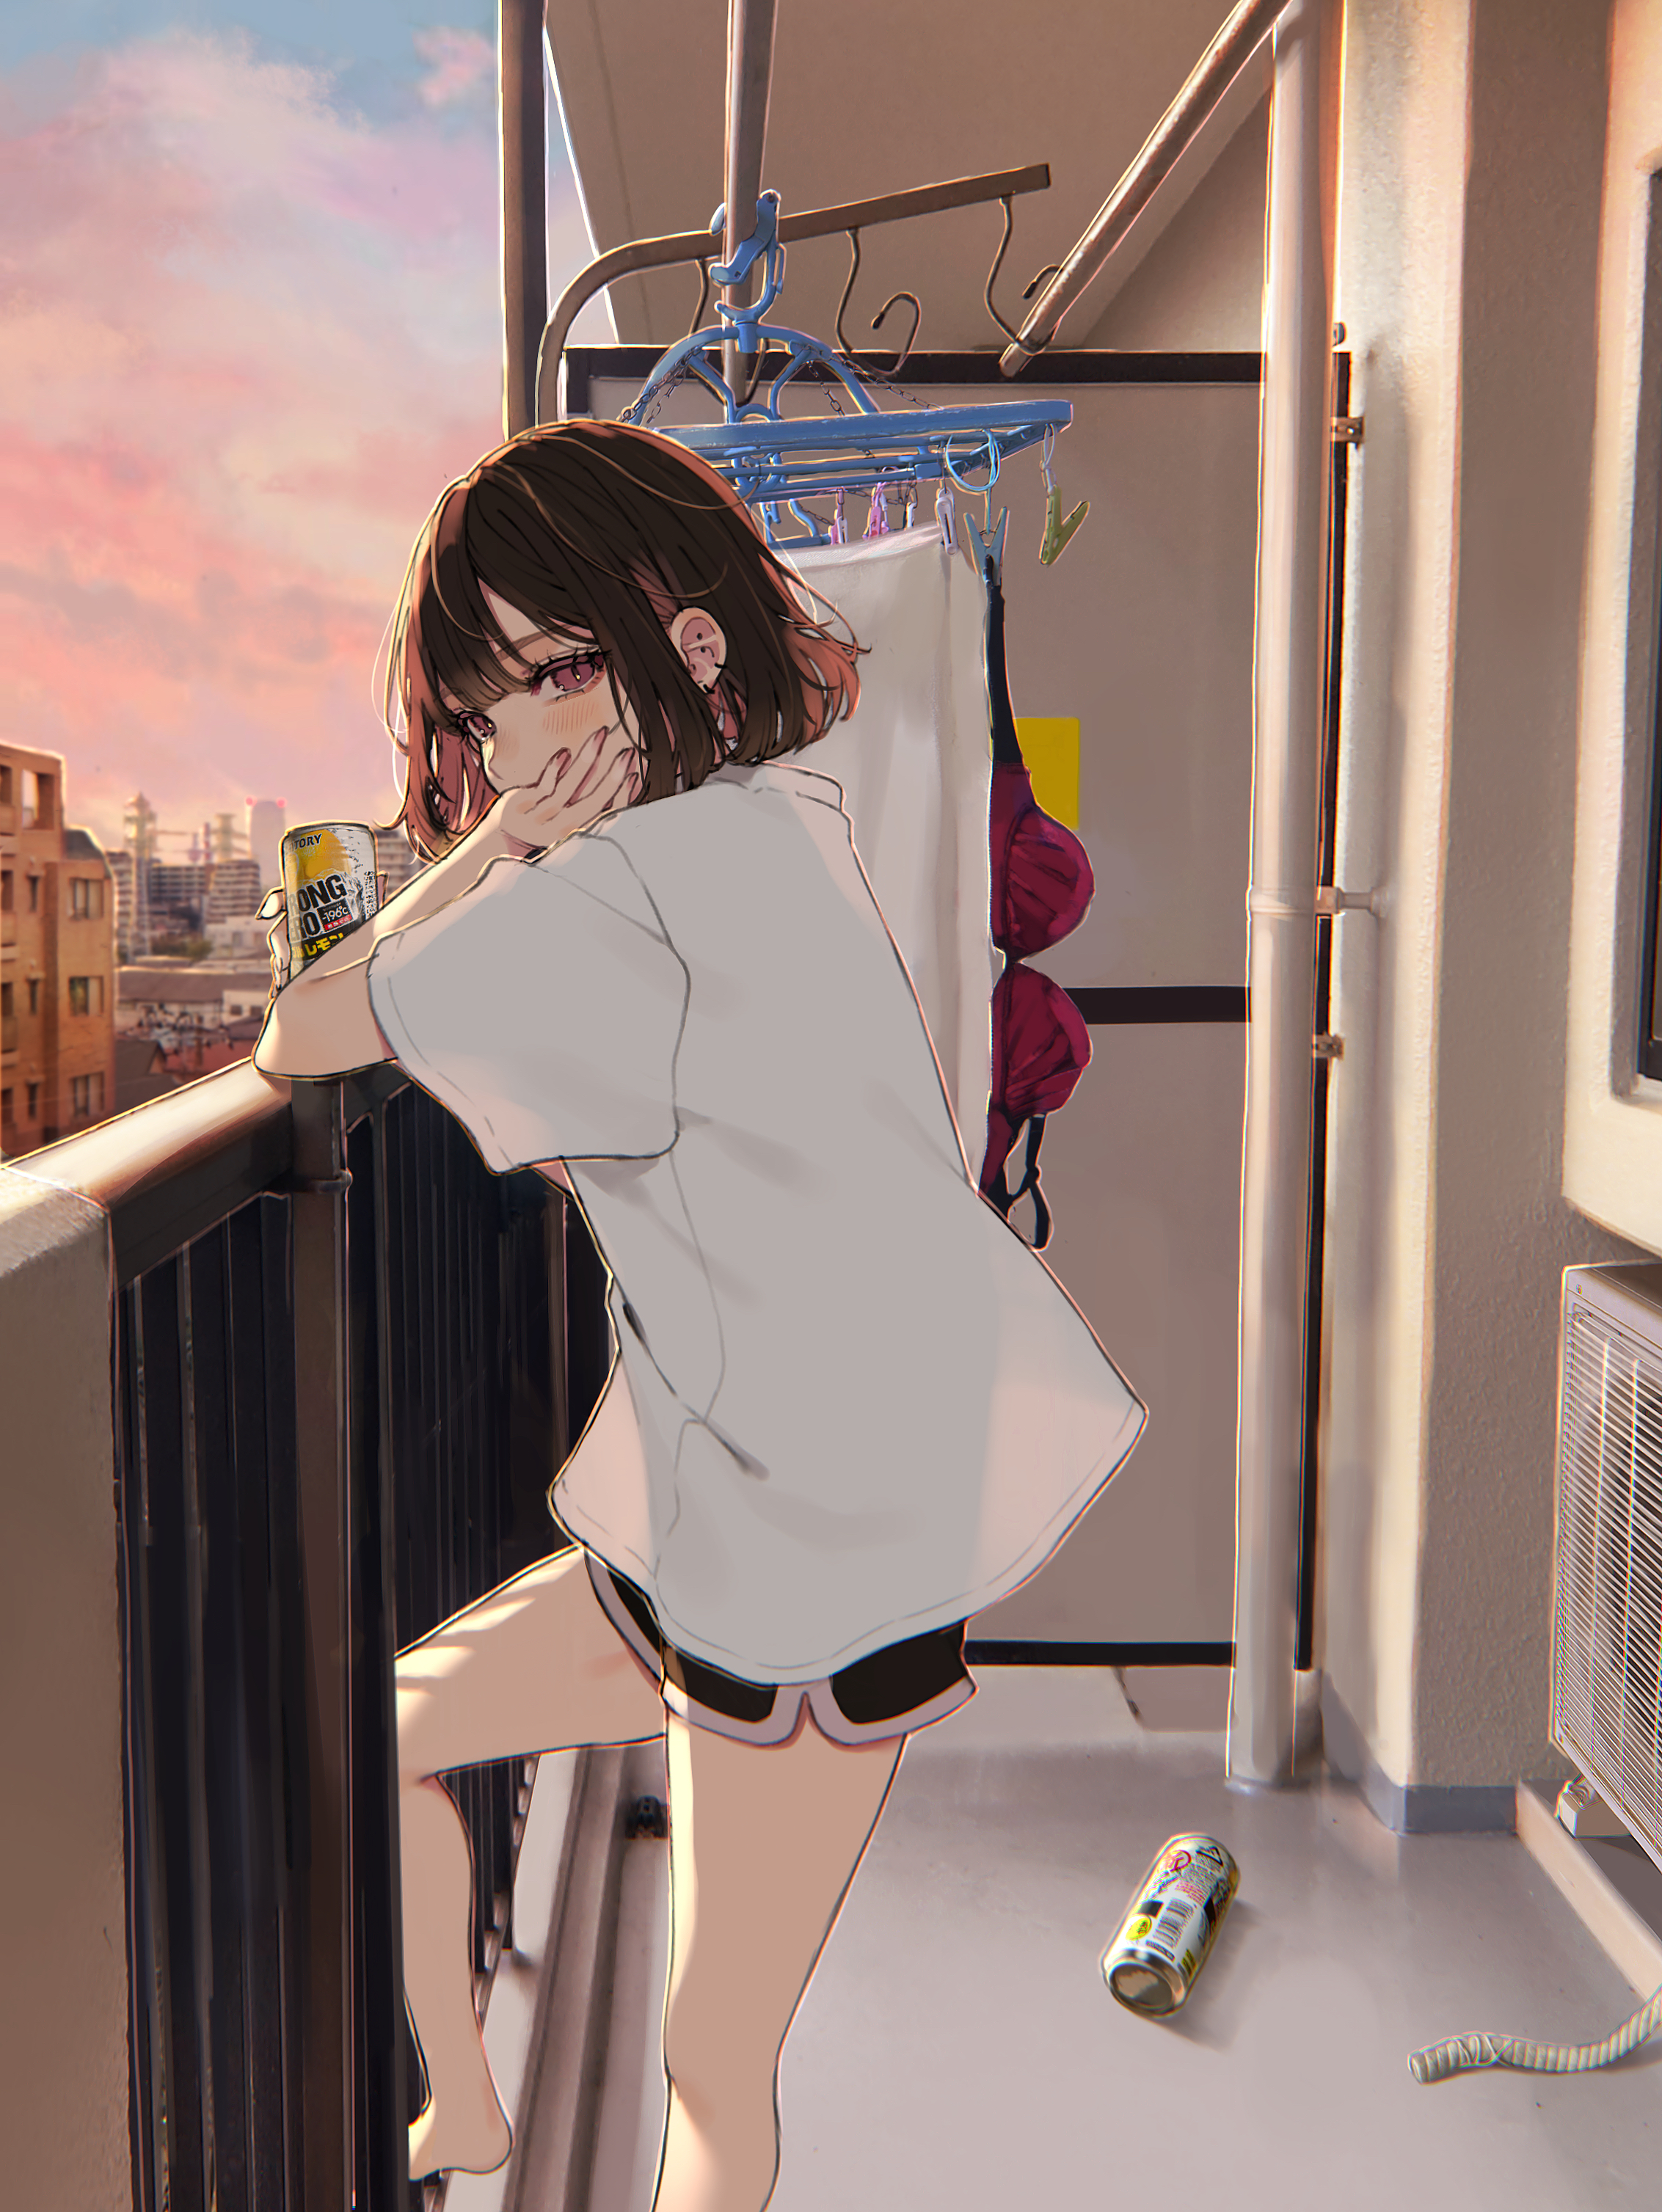 Anime 2265x3015 anime anime girls balcony portrait display short hair brunette Daluto looking at viewer can standing bra laundry purple eyes shoulder length hair T-shirt white tops